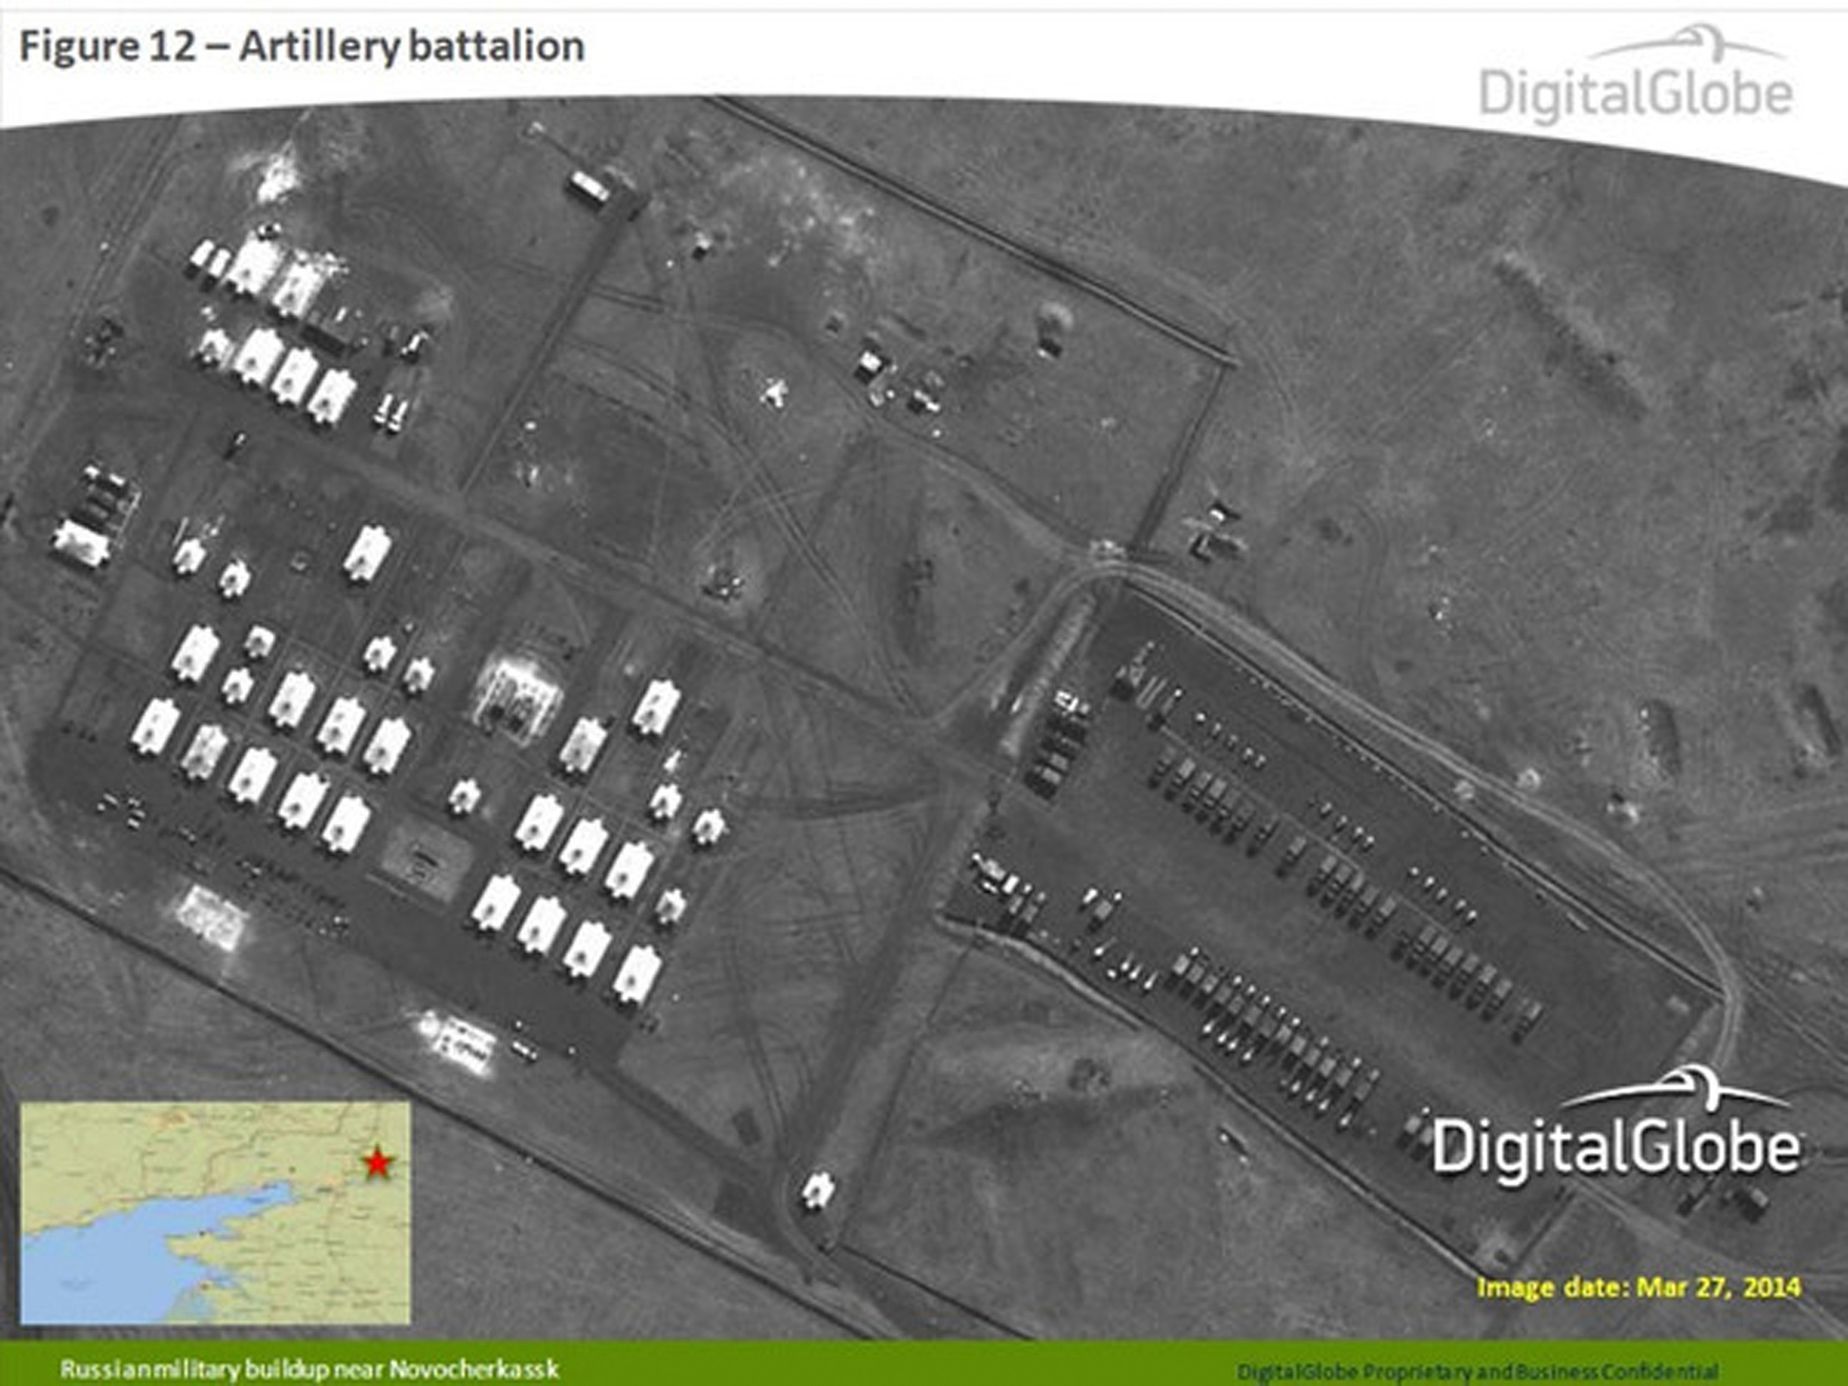 A satellite image provided to Reuters by SHAPE and taken by DigitalGlobe shows what is reported by SHAPE to be a Russian artillery battalion in Novocherkassk